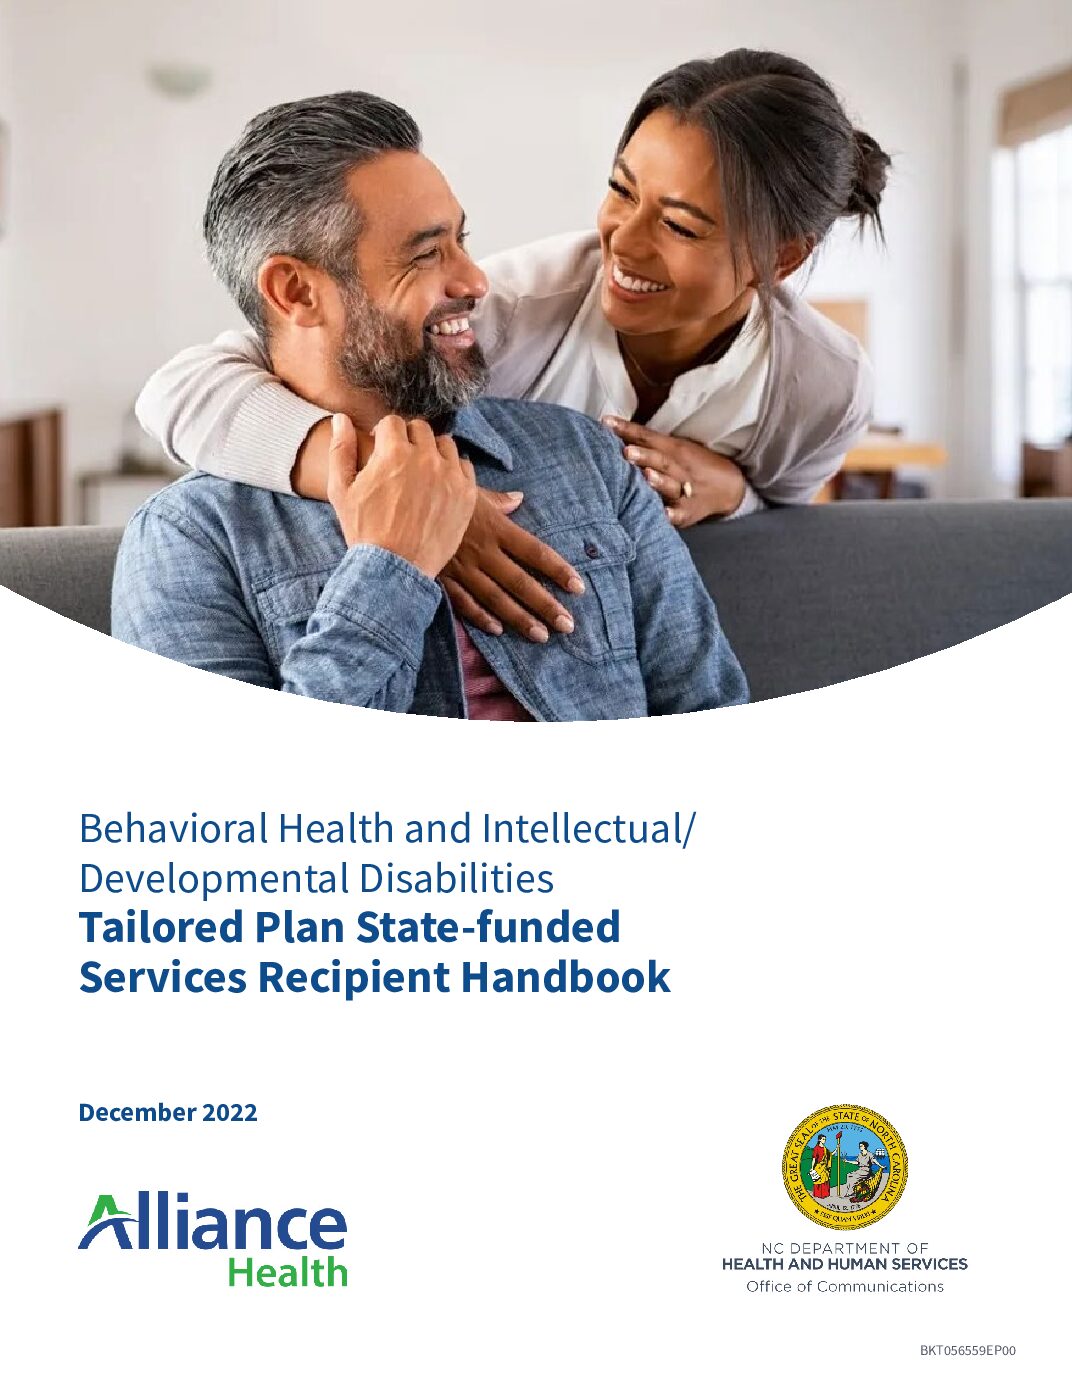 Tailored Plan State-funded Services Recipient Handbook